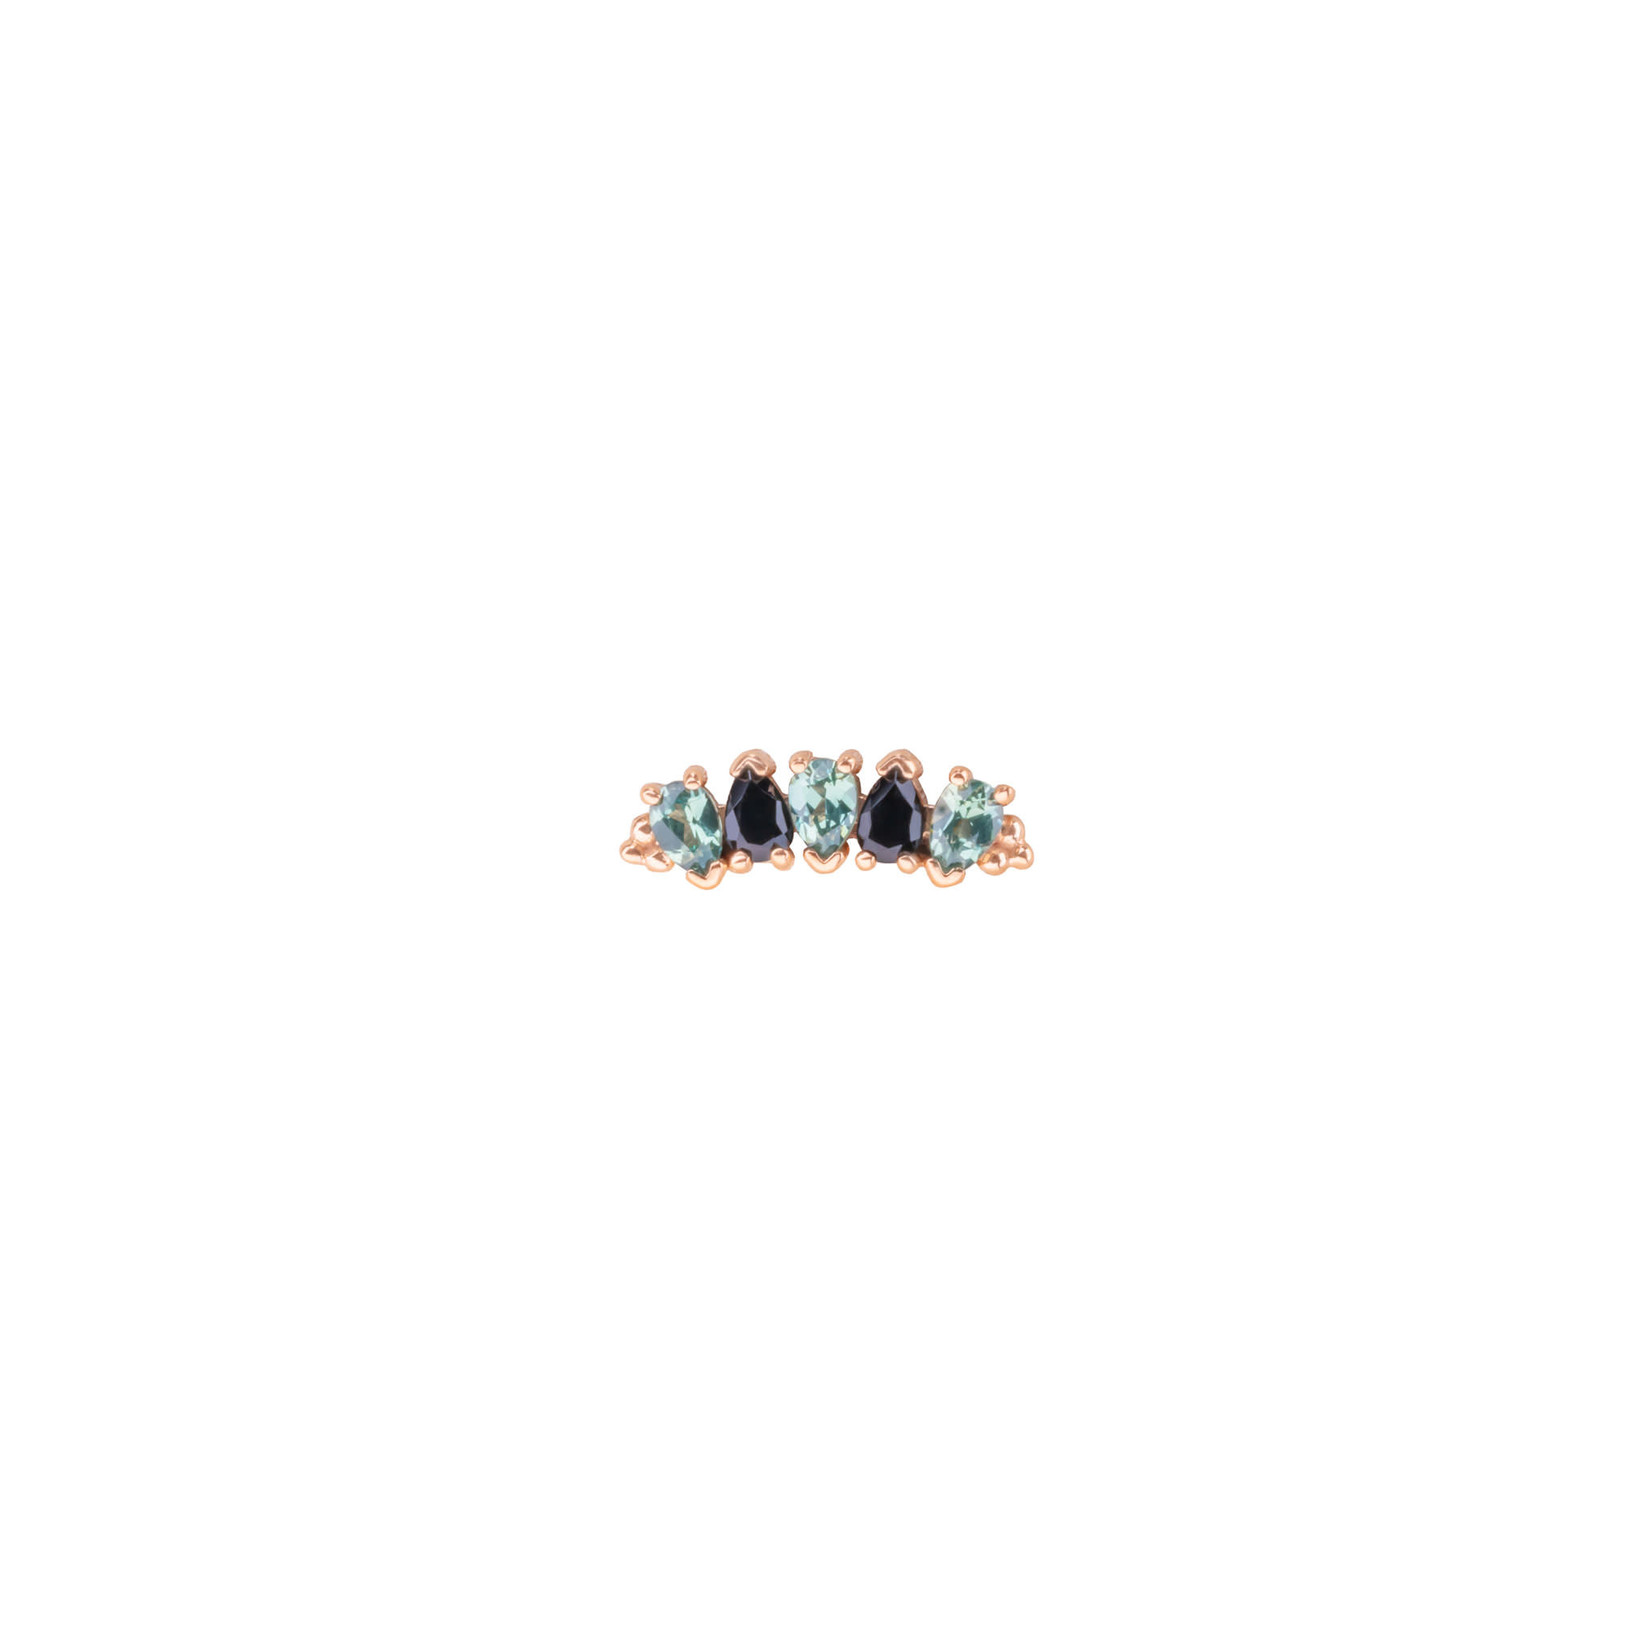 BVLA BVLA rose gold 12x3.5 "Nalani 5" threaded end with 3x 3x2 grey sapphire pear and 2x 3x2 faceted onyx pear